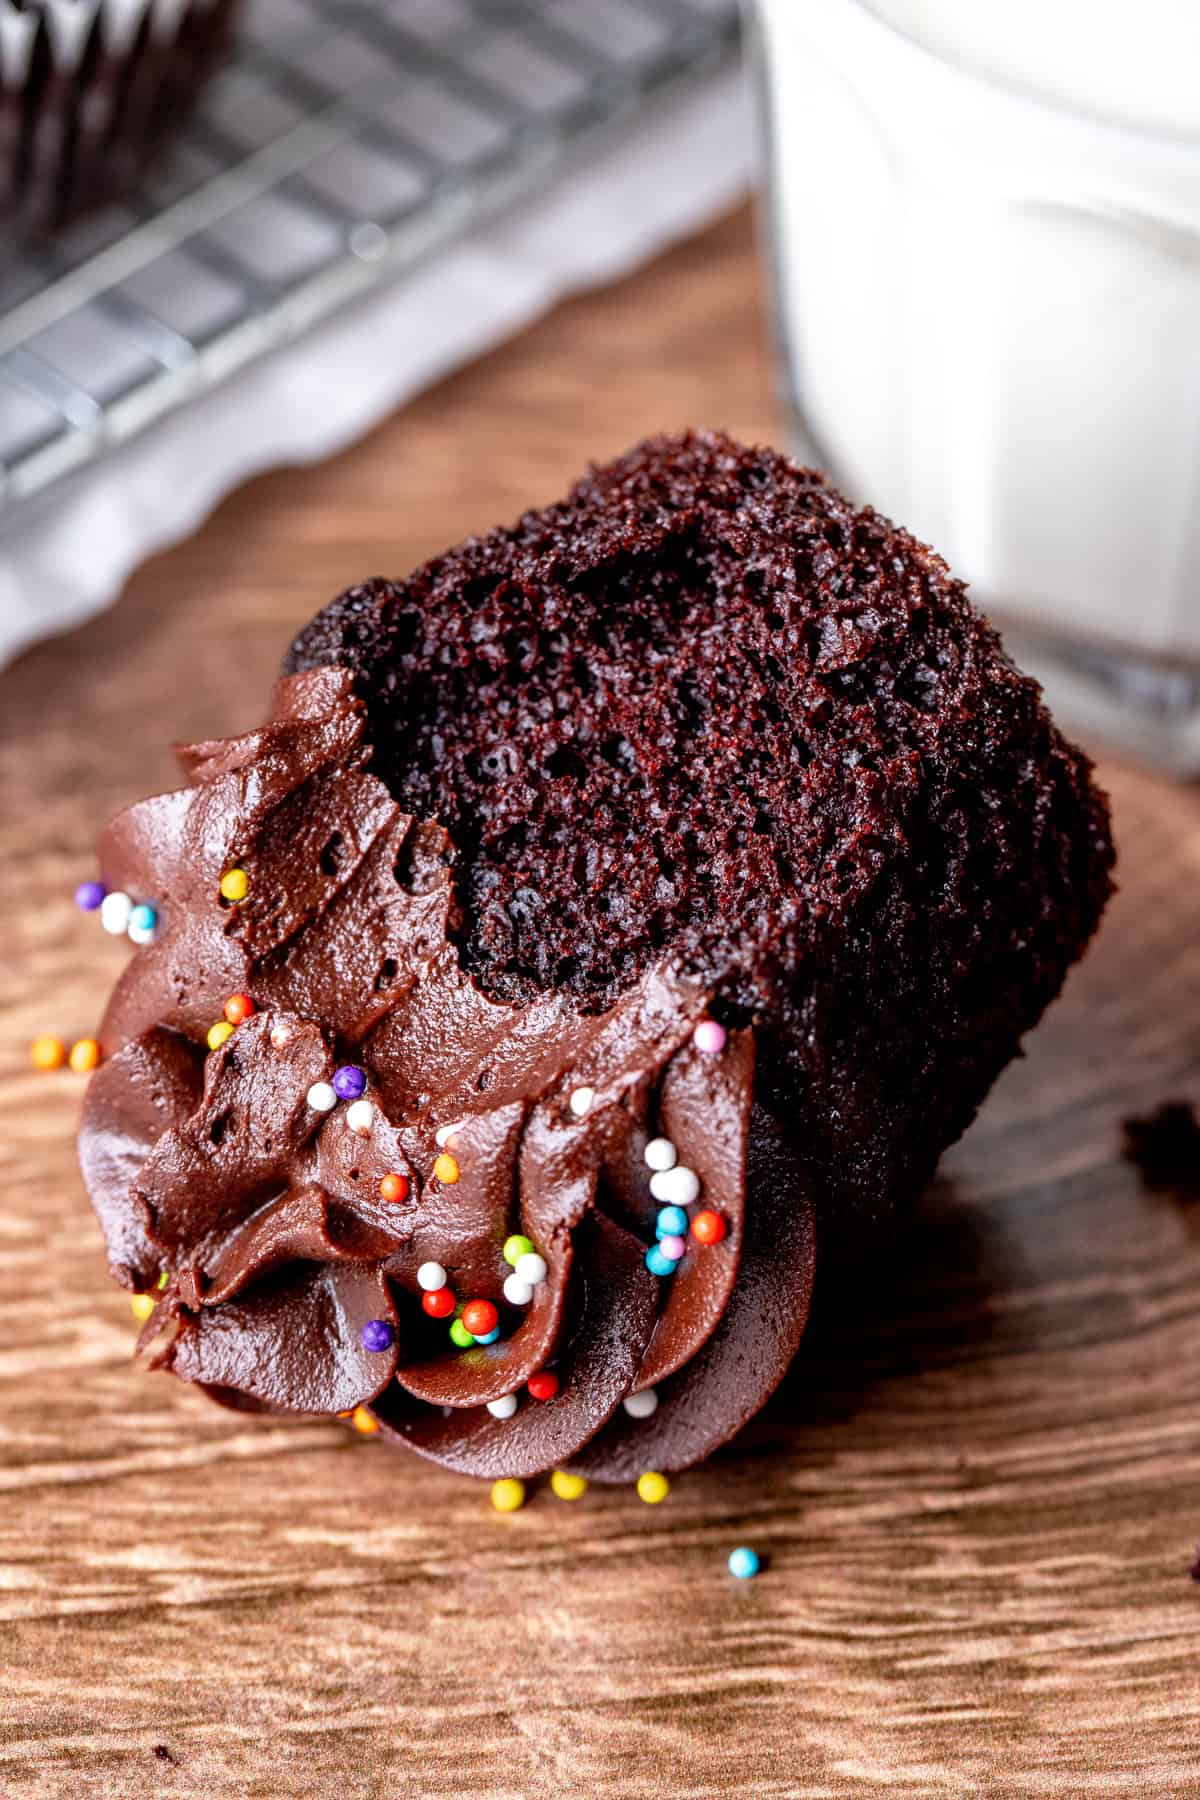 Double chocolate cupcake with bite taken out, on its side